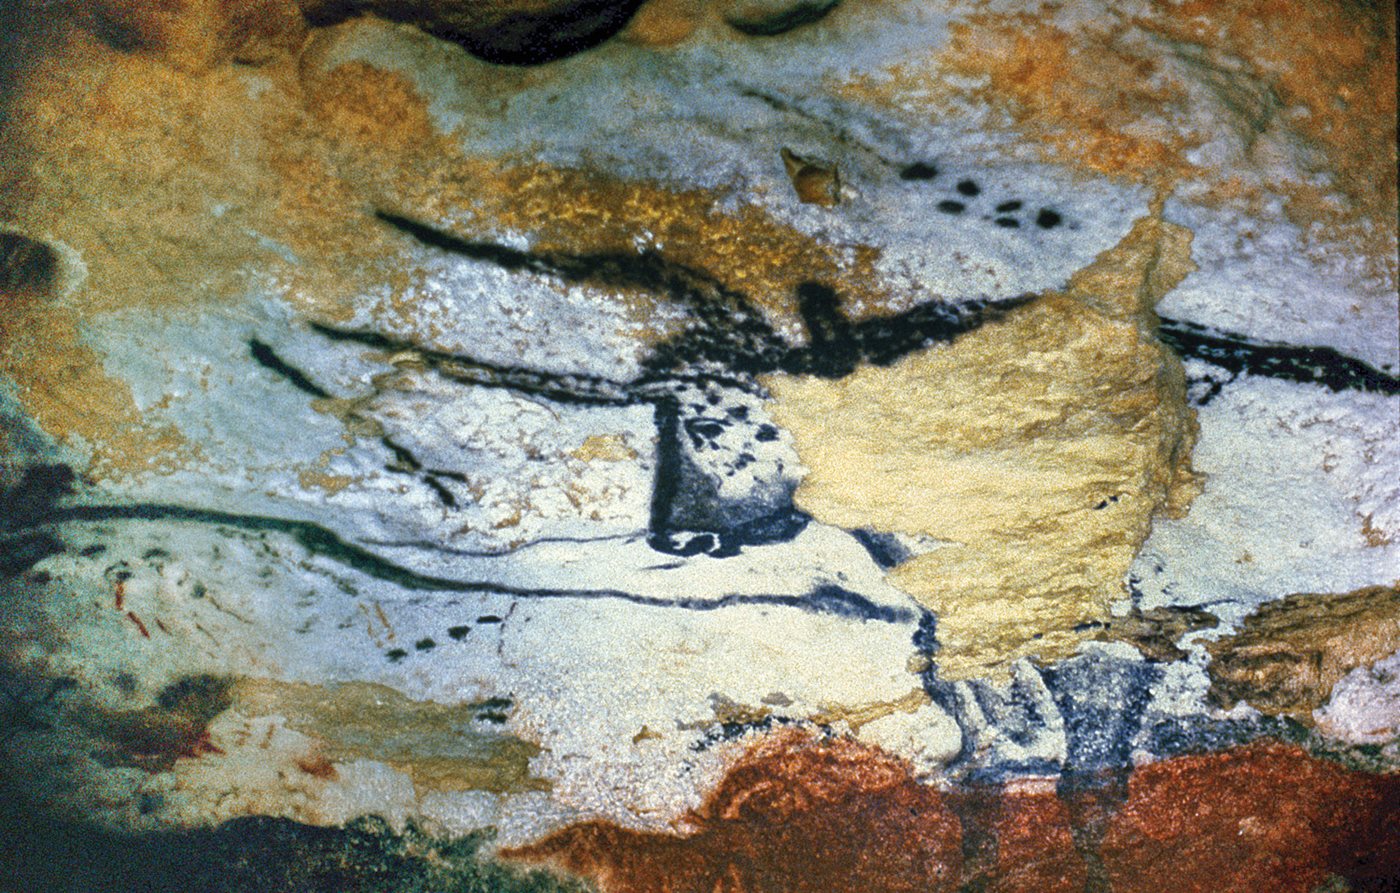 <p>The pattern of dots above the painting of the bull&rsquo;s head resembles the arrangement of stars in either the Pleiades or Taurus (the Bull), and four more dots below the bull could also be stars. This painting appears among others in the caves near Lascaux, in southwest France, and it is some 17,000 years old. The depiction of the bull itself reinforces the interpretation that this painting may be an early zodiacal representation. If so, it then hints that some zodiac signs may long predate the Babylonian zodiac and may have been shared across great distances.</p>
